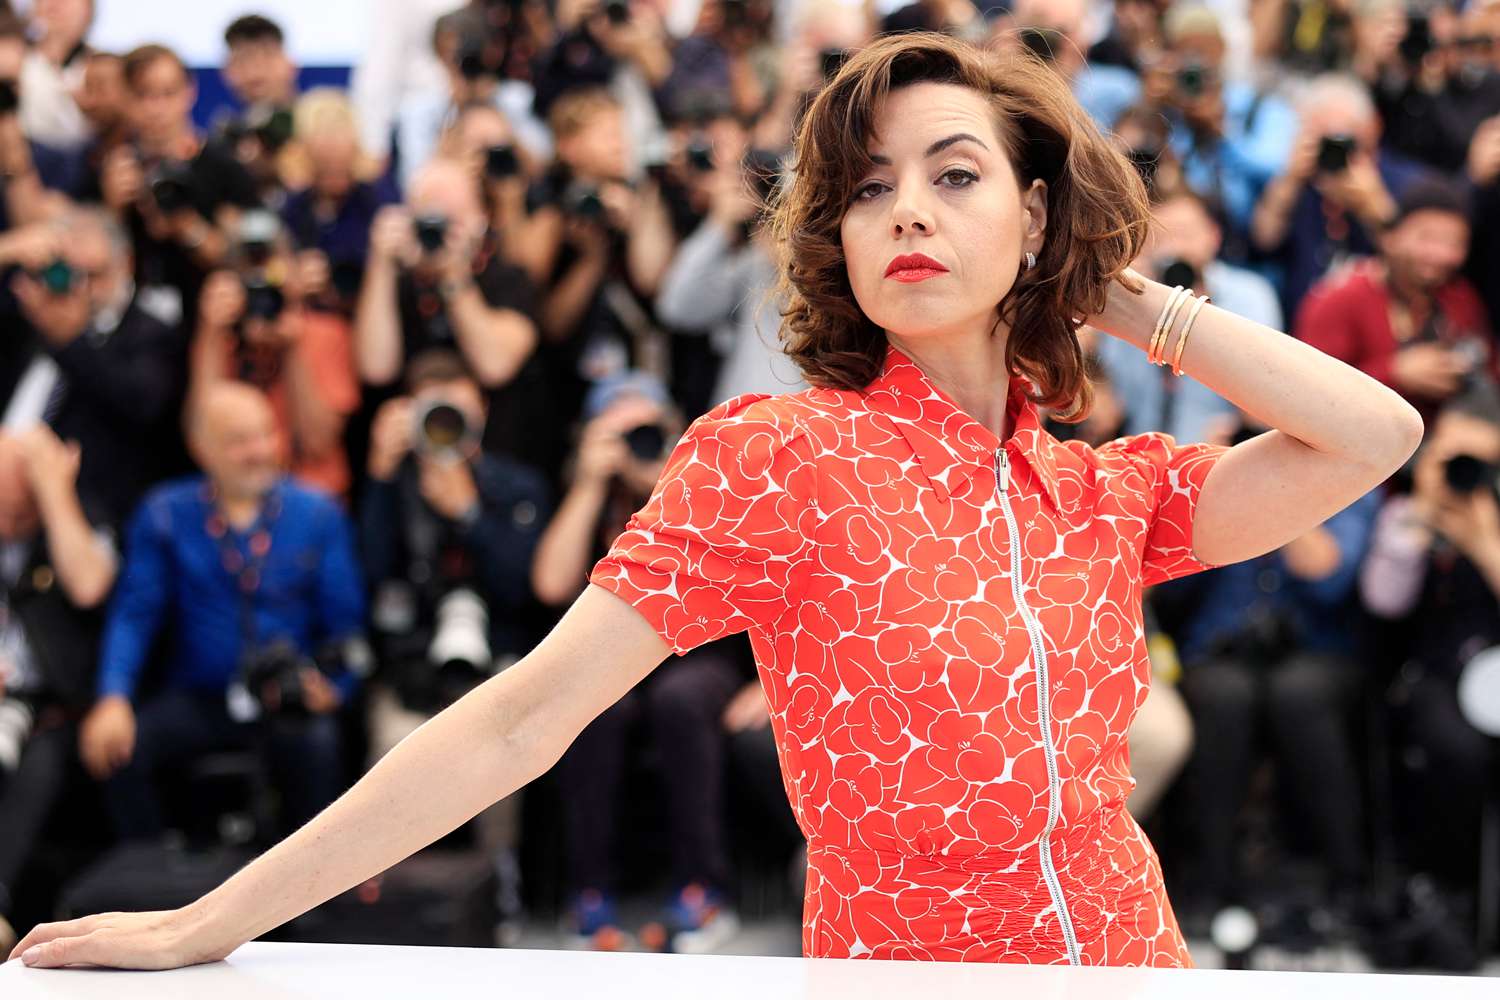 Aubrey Plaza poses during a photocall for the film "Megalopolis" at the 77th edition of the Cannes Film Festival in Cannes, southern France, 